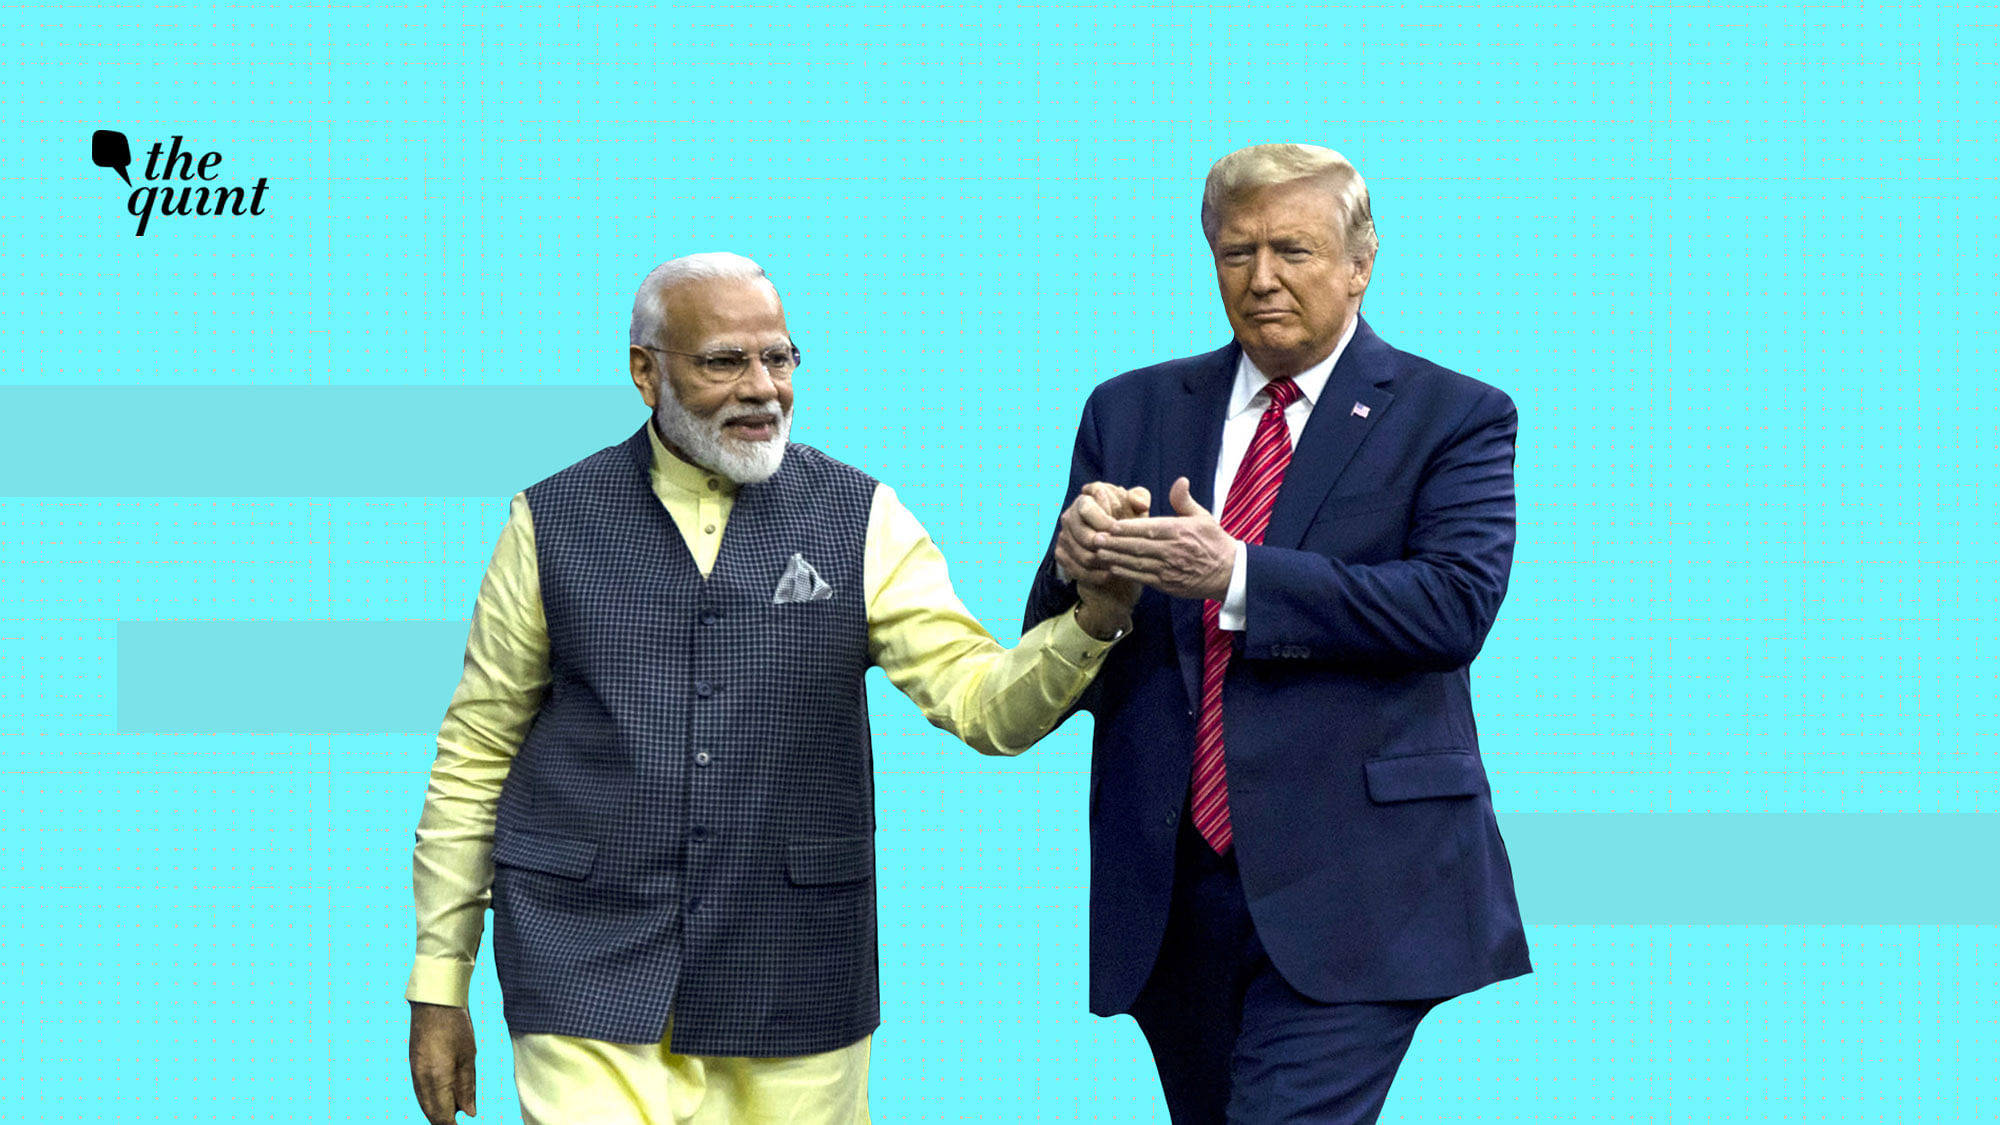 "Look at China, how filthy it is. Look at Russia. Look at India. The air is filthy.", said President Trump during the final presidential debate. 